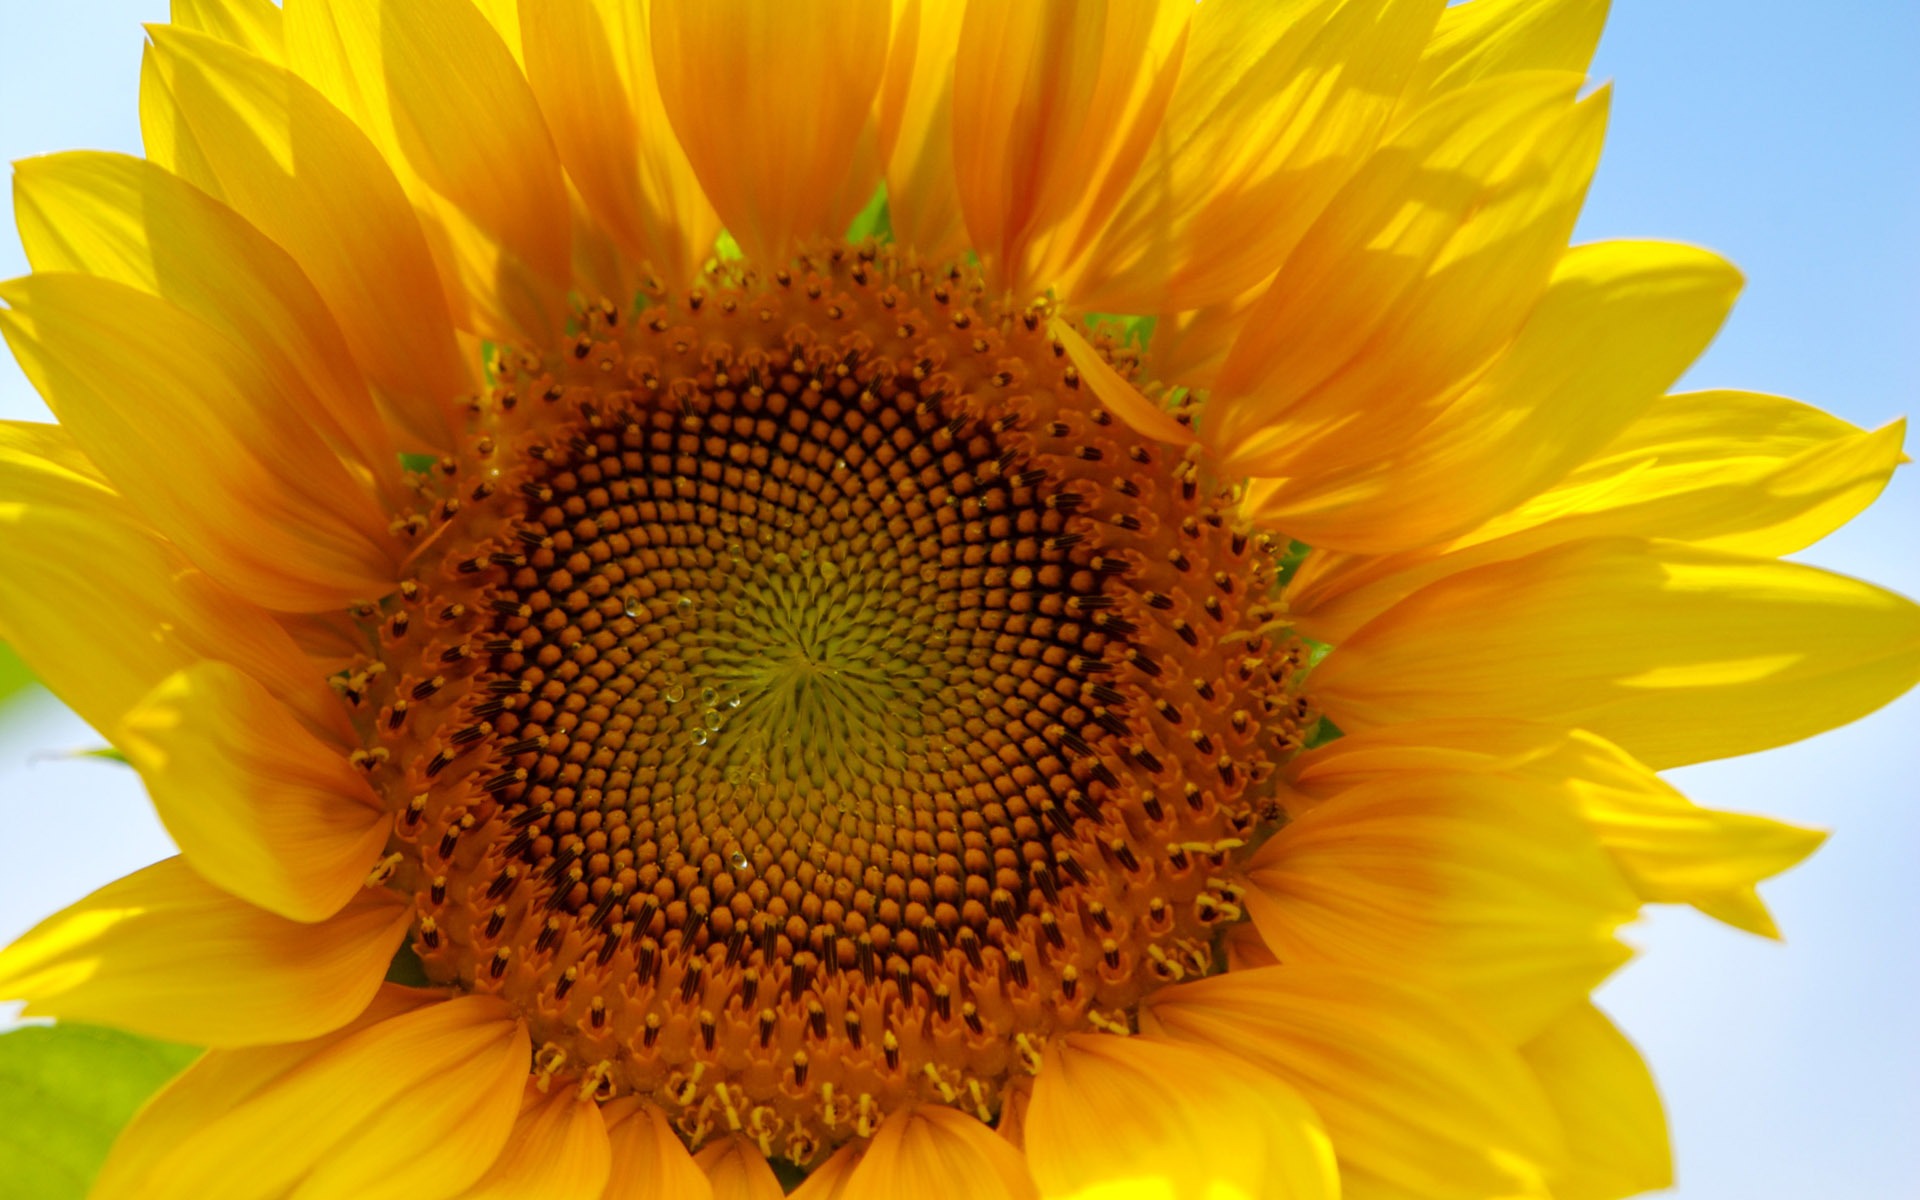 Sunny sunflower photo HD Wallpapers #4 - 1920x1200